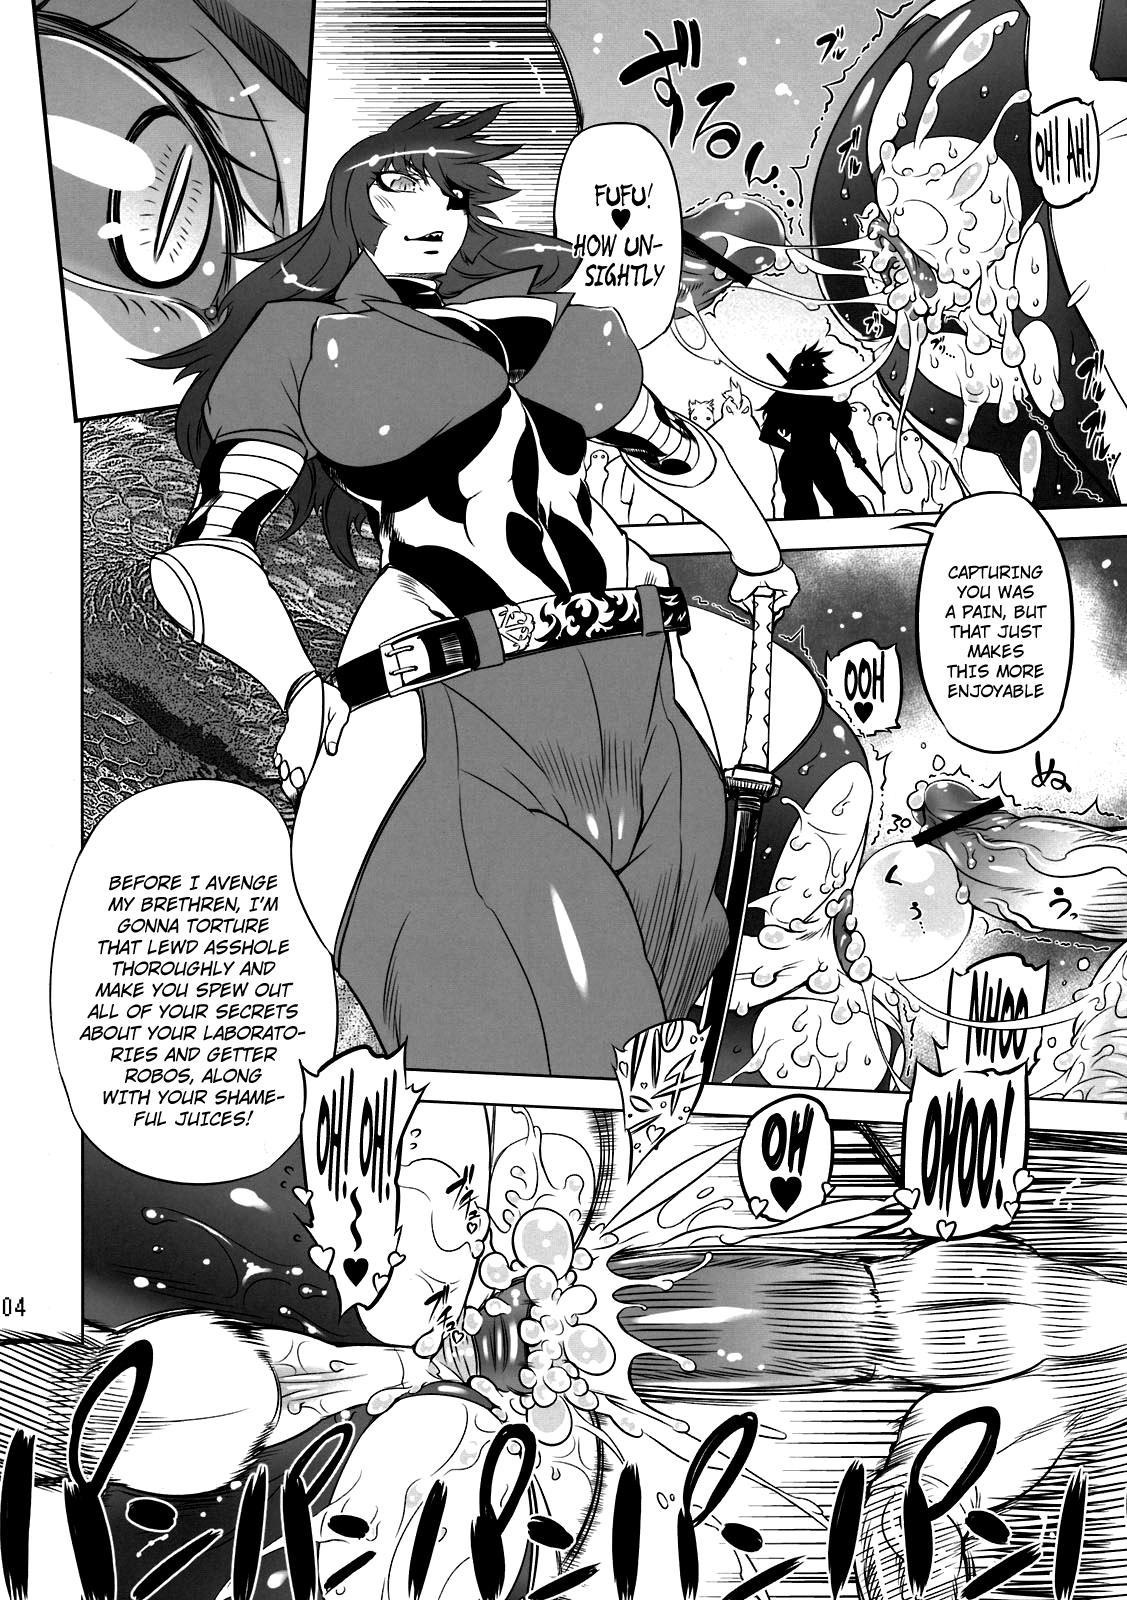 American Change!! - Getter robo Ameture Porn - Page 4